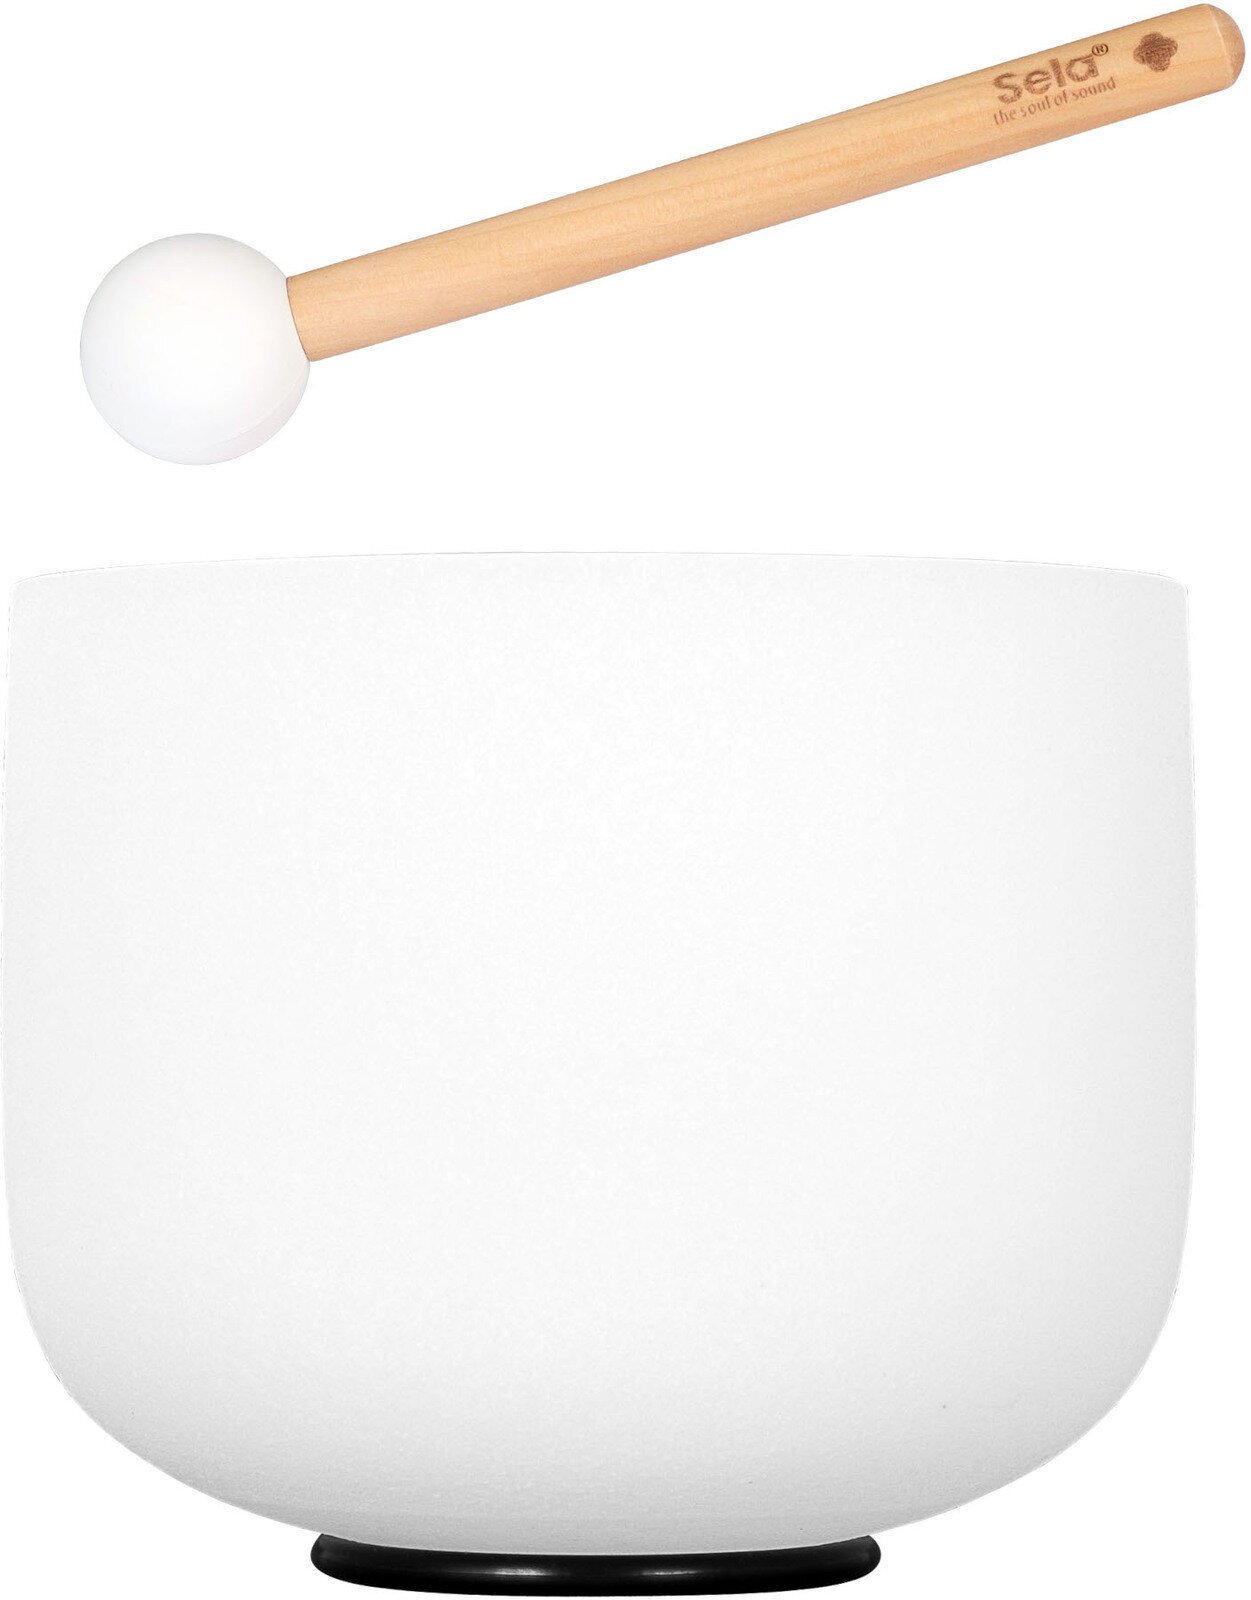 Percussion for music therapy Sela 10" Crystal Singing Bowl Frosted 440 Hz E incl. 1 Wood Mallet